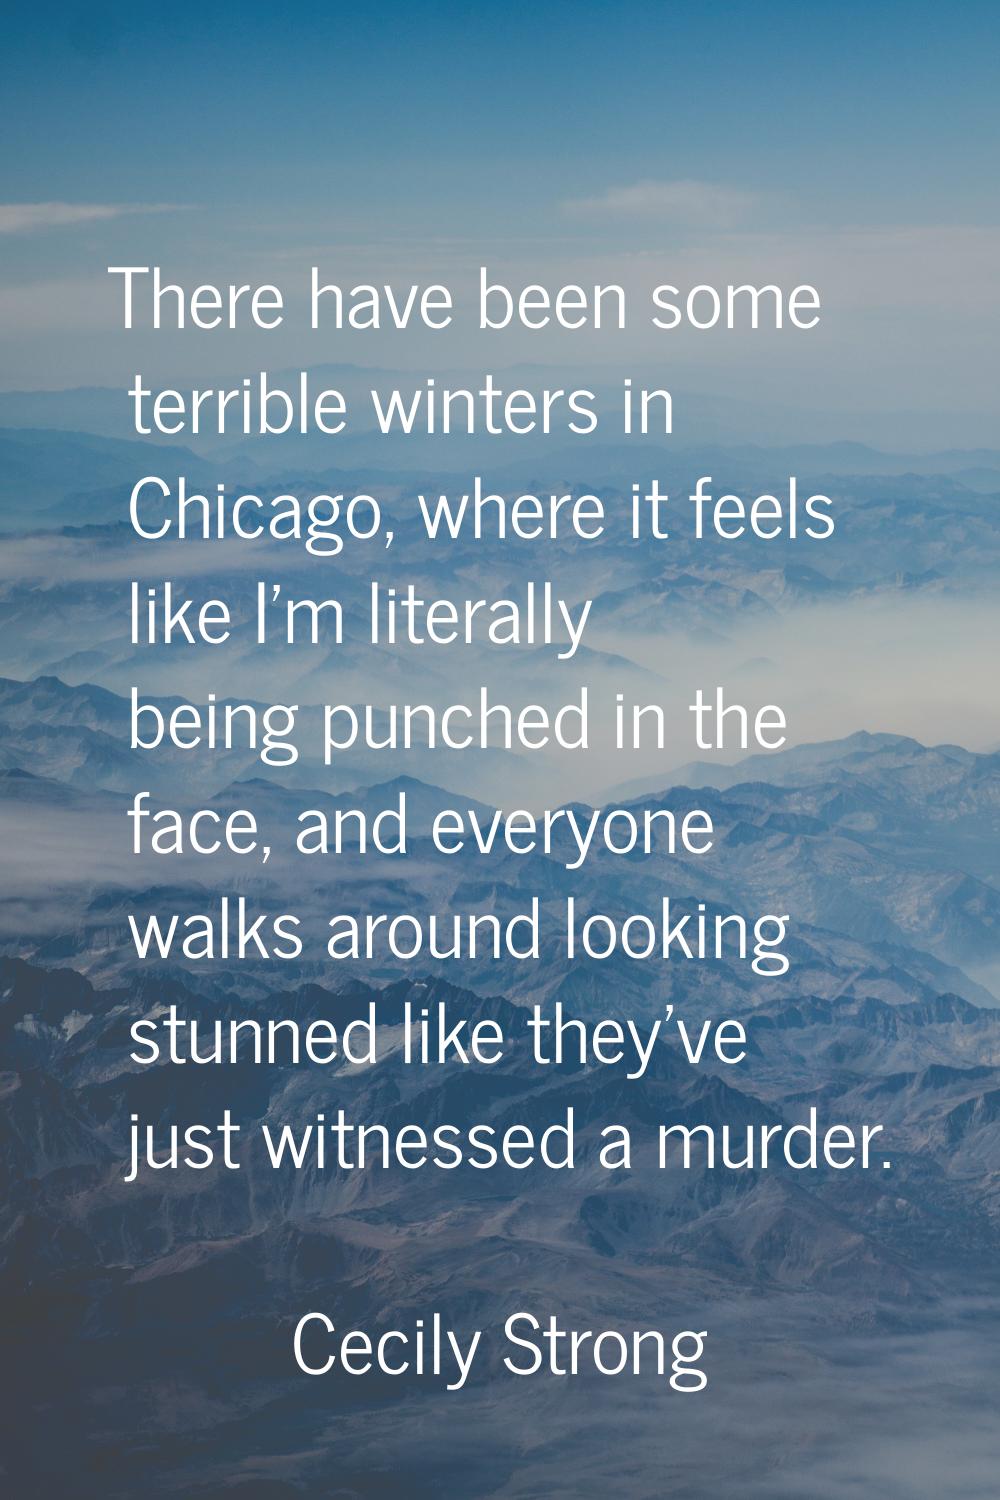 There have been some terrible winters in Chicago, where it feels like I'm literally being punched i